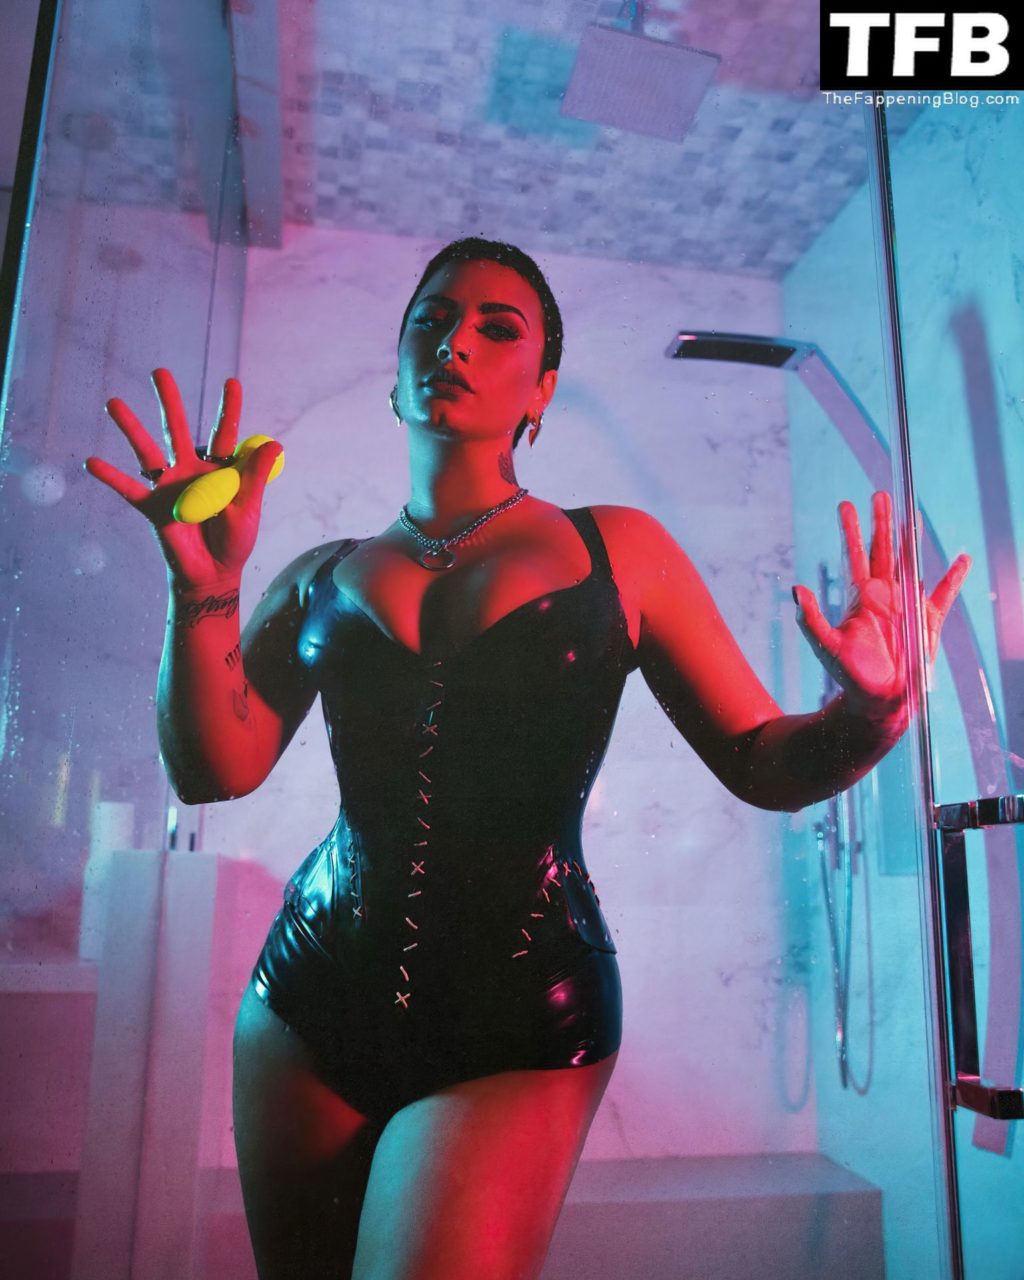 Demi Lovato Shows Off Her Big Boobs in the Shower (10 Photos)